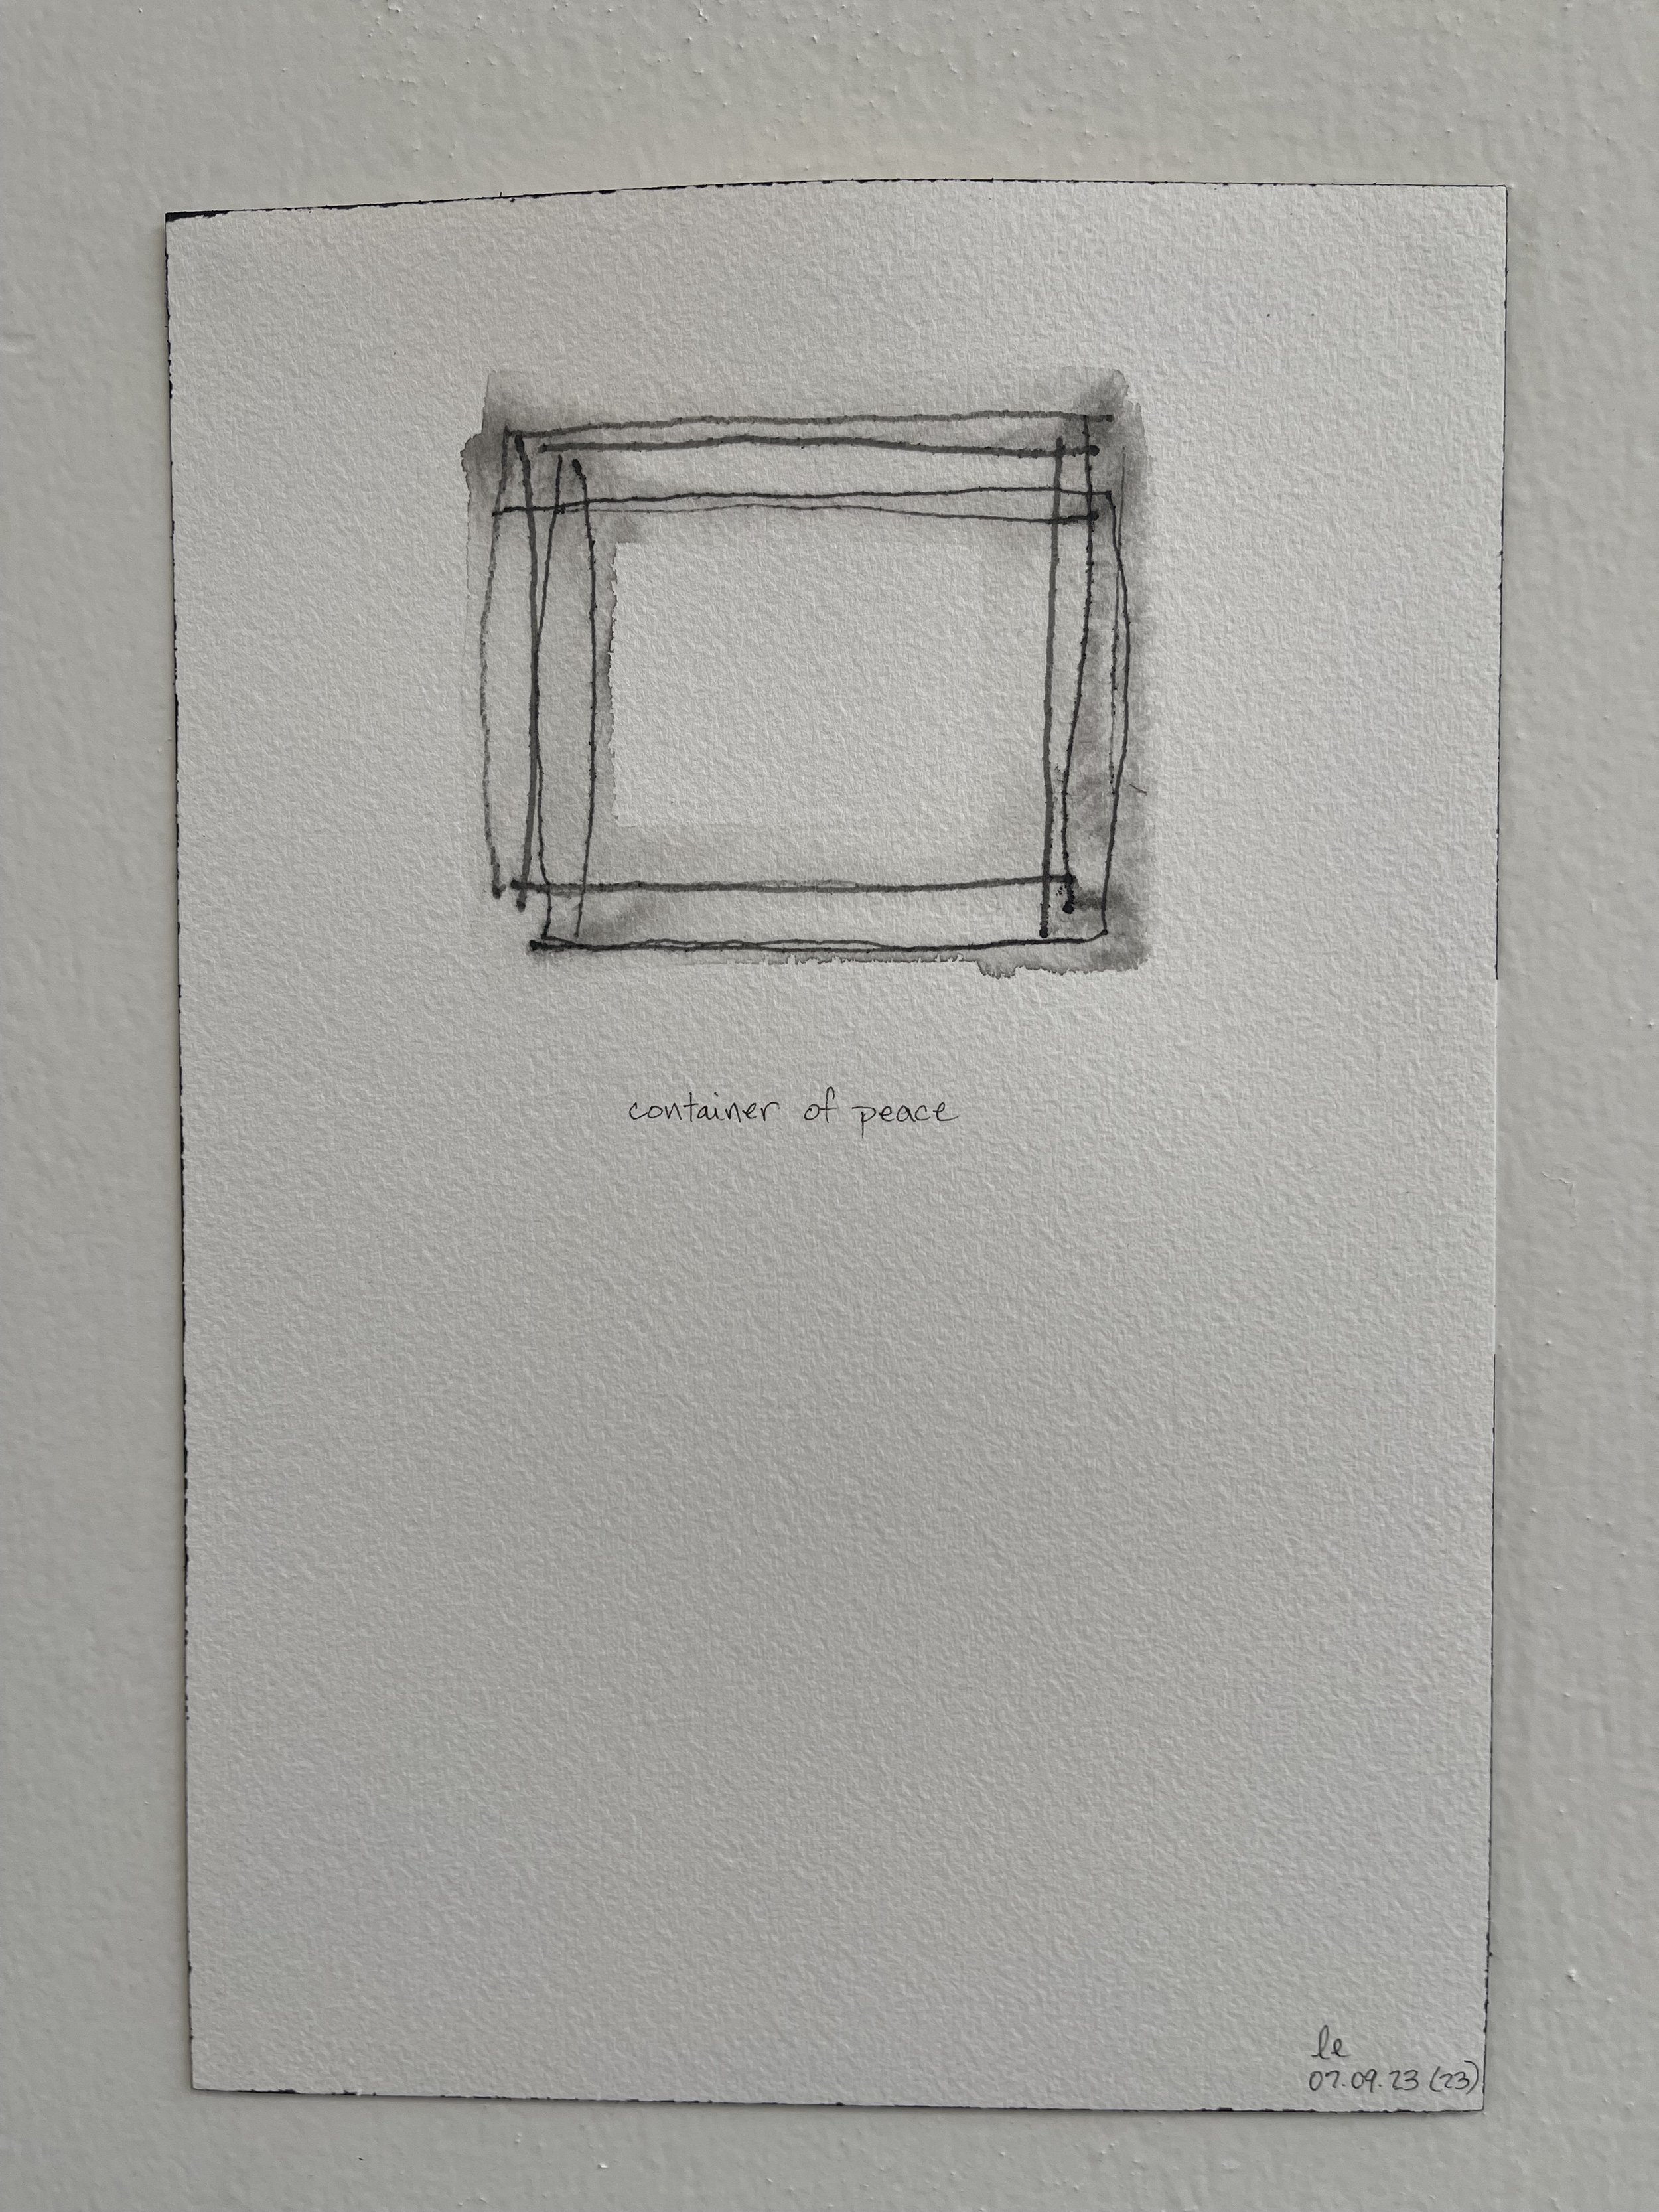 container of peace (23), 2023 | watercolor graphite on Arches paper | 7" x 10" | NFS